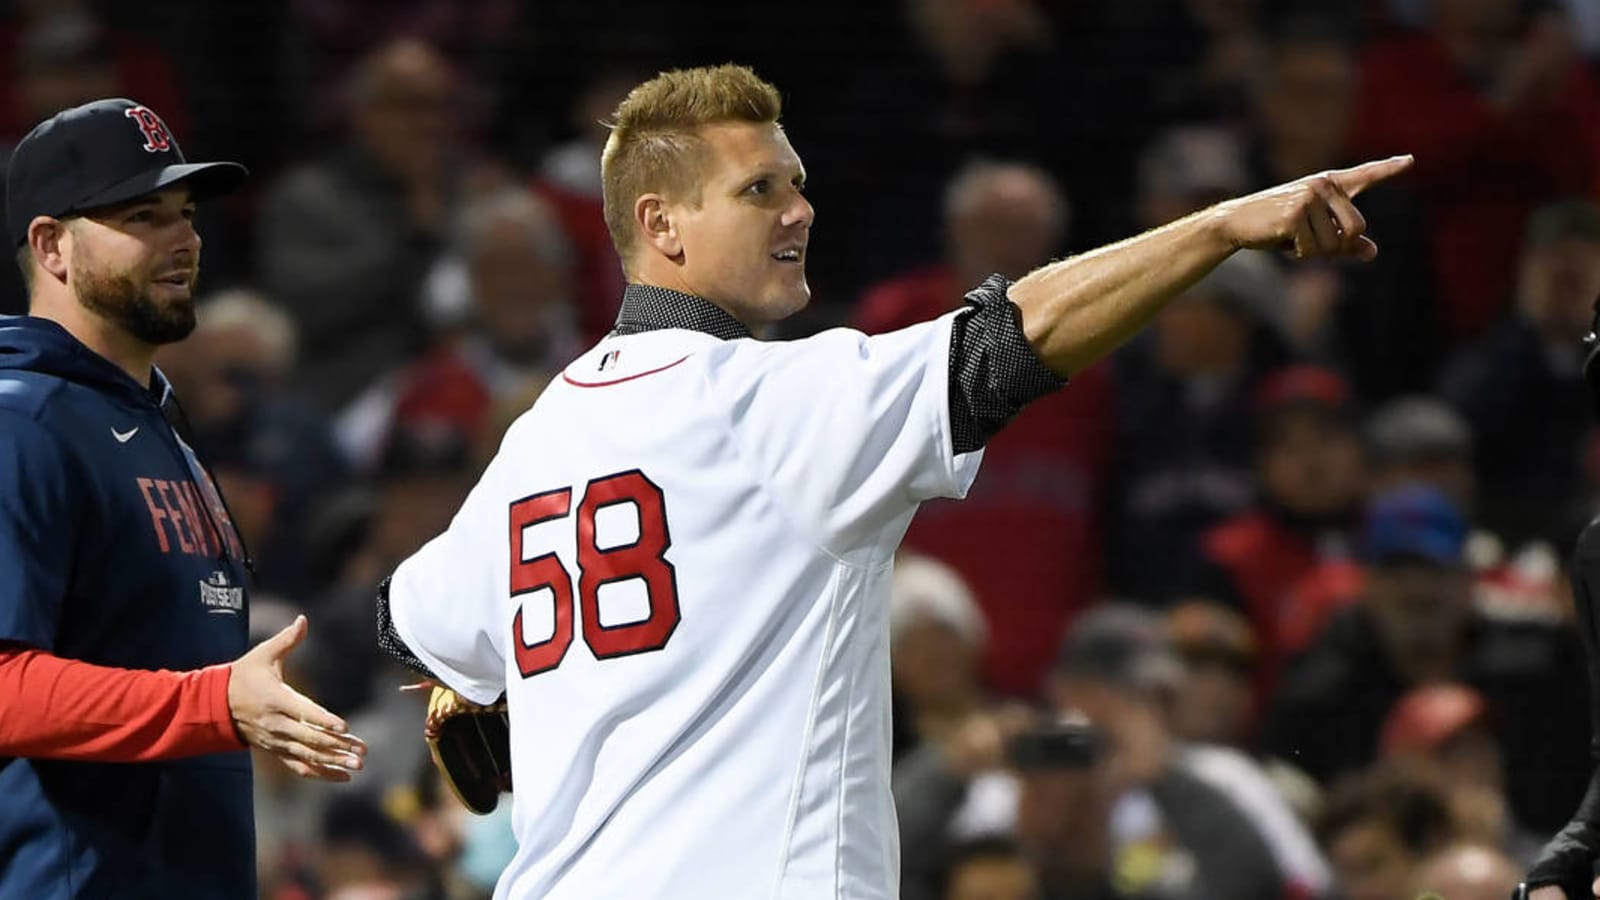 Watch: Jonathan Papelbon threw a real heater on ceremonial first pitch